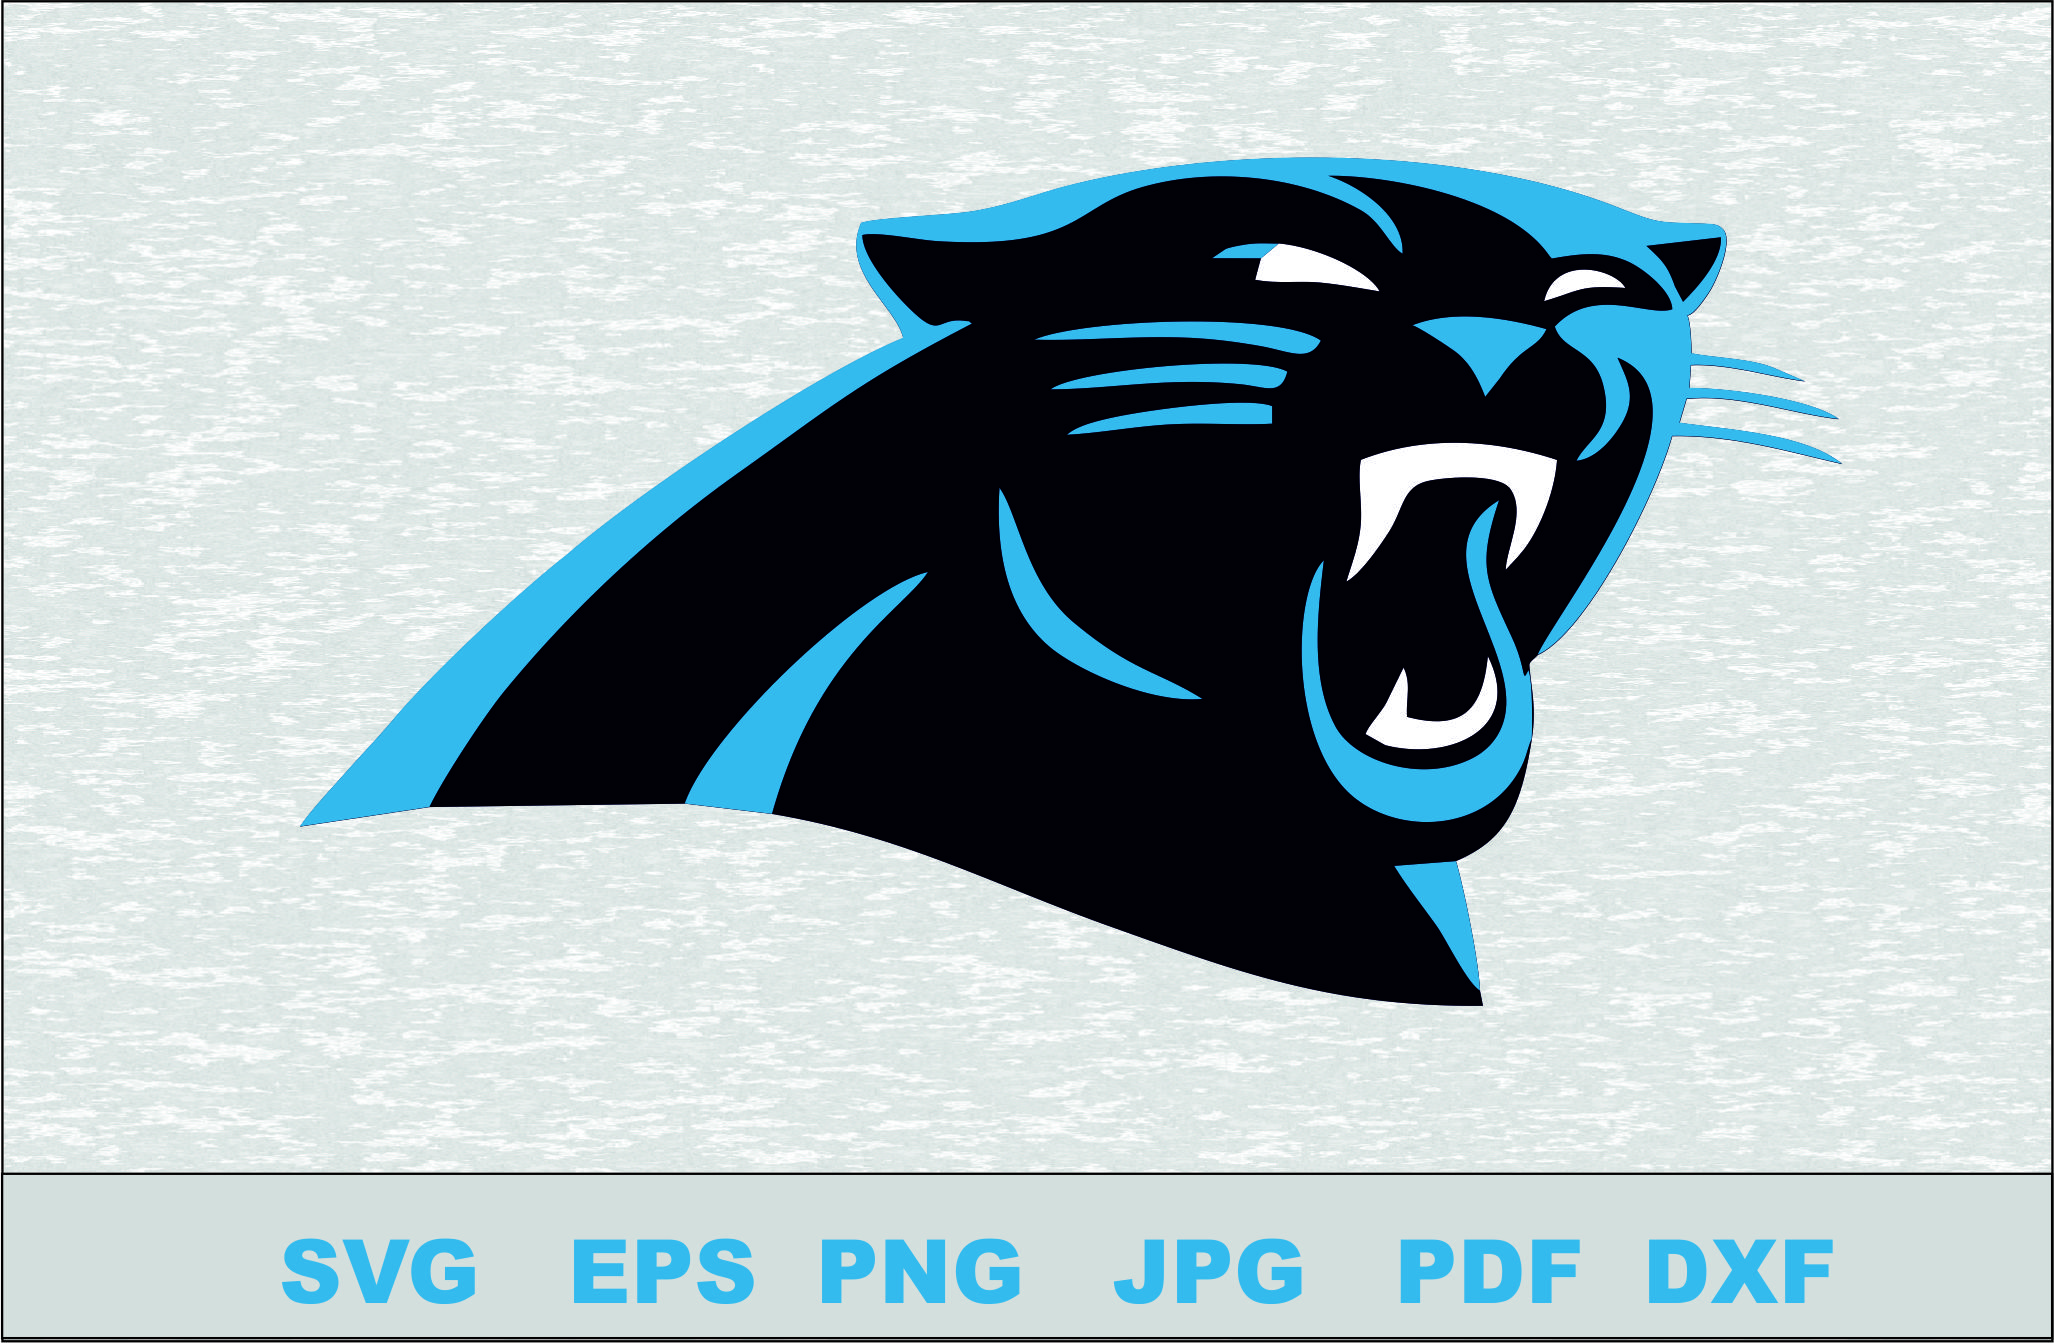 Clip Art And Image Files Craft Supplies And Tools Carolina Panthers Svg For